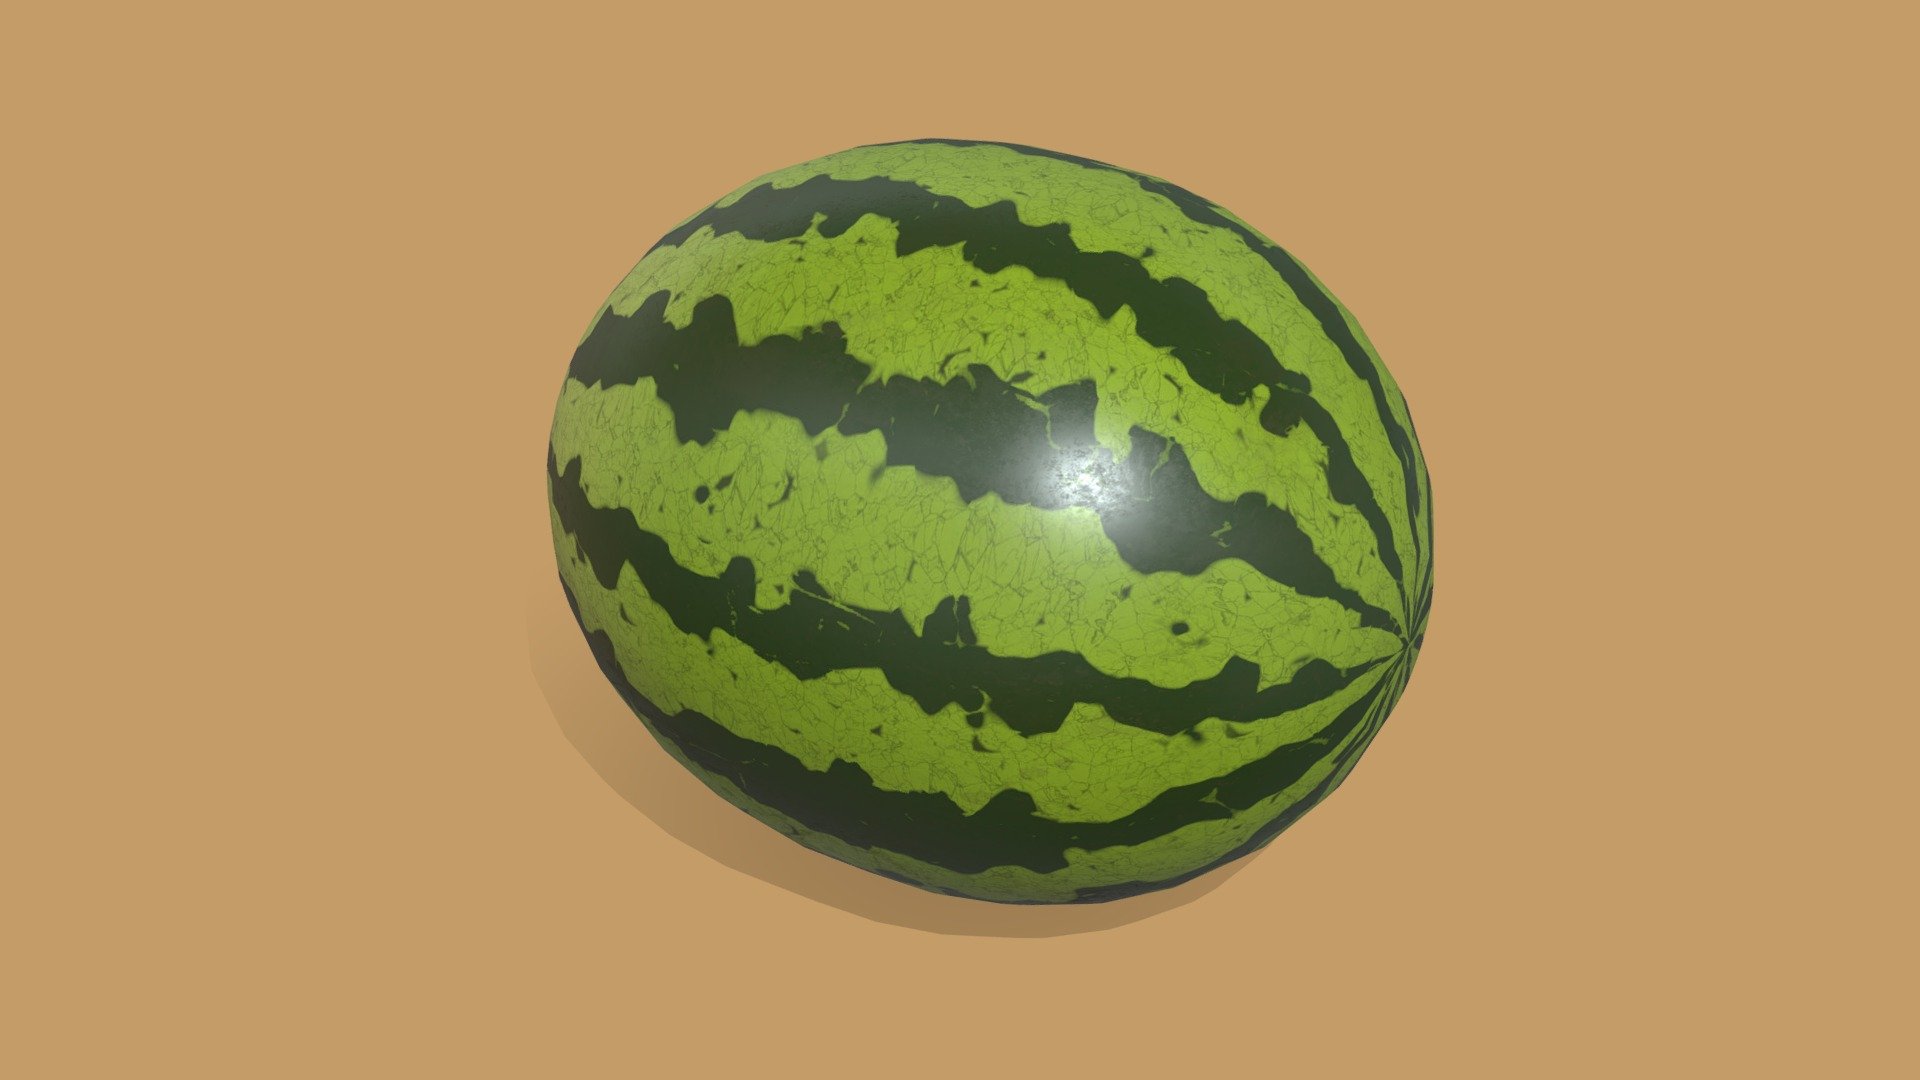 Procedural Watermelon Texture Study I did during my spare time with substance painter

✧ Download the Project file here for free
https://ko-fi.com/s/f6165c6c27

✧Follow me on twitter for more content update 
https://twitter.com/TMeowvortex

✧Procedural Watermelon Tutorial available on my YT channel 
https://www.youtube.com/watch?v=mtuLVNDZFj8&amp;t=608s&amp;ab_channel=Meow-Vortex - Procedural Watermelon [Free] - Download Free 3D model by Meow-Vortex 3d model